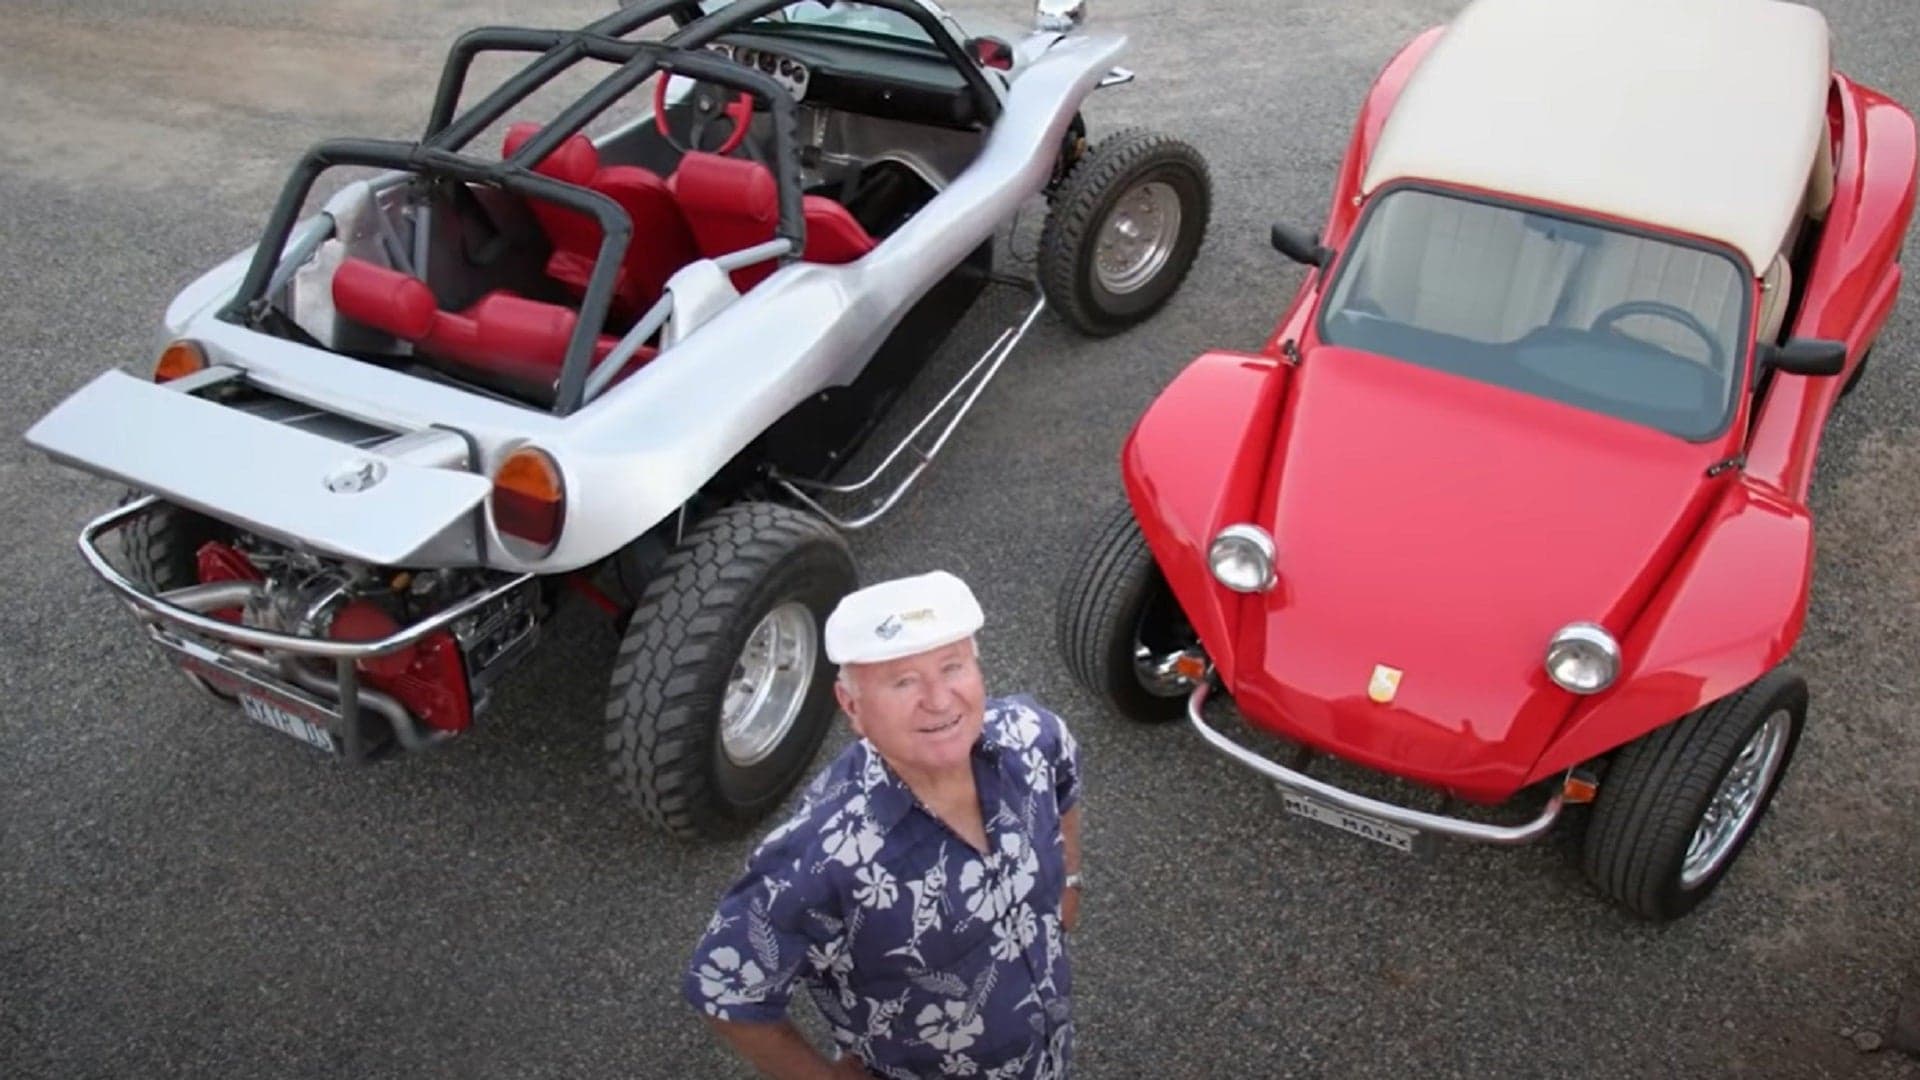 Farewell to Bruce Meyers, Off-Road Pioneer and Father of the Meyers Manx Dune Buggy